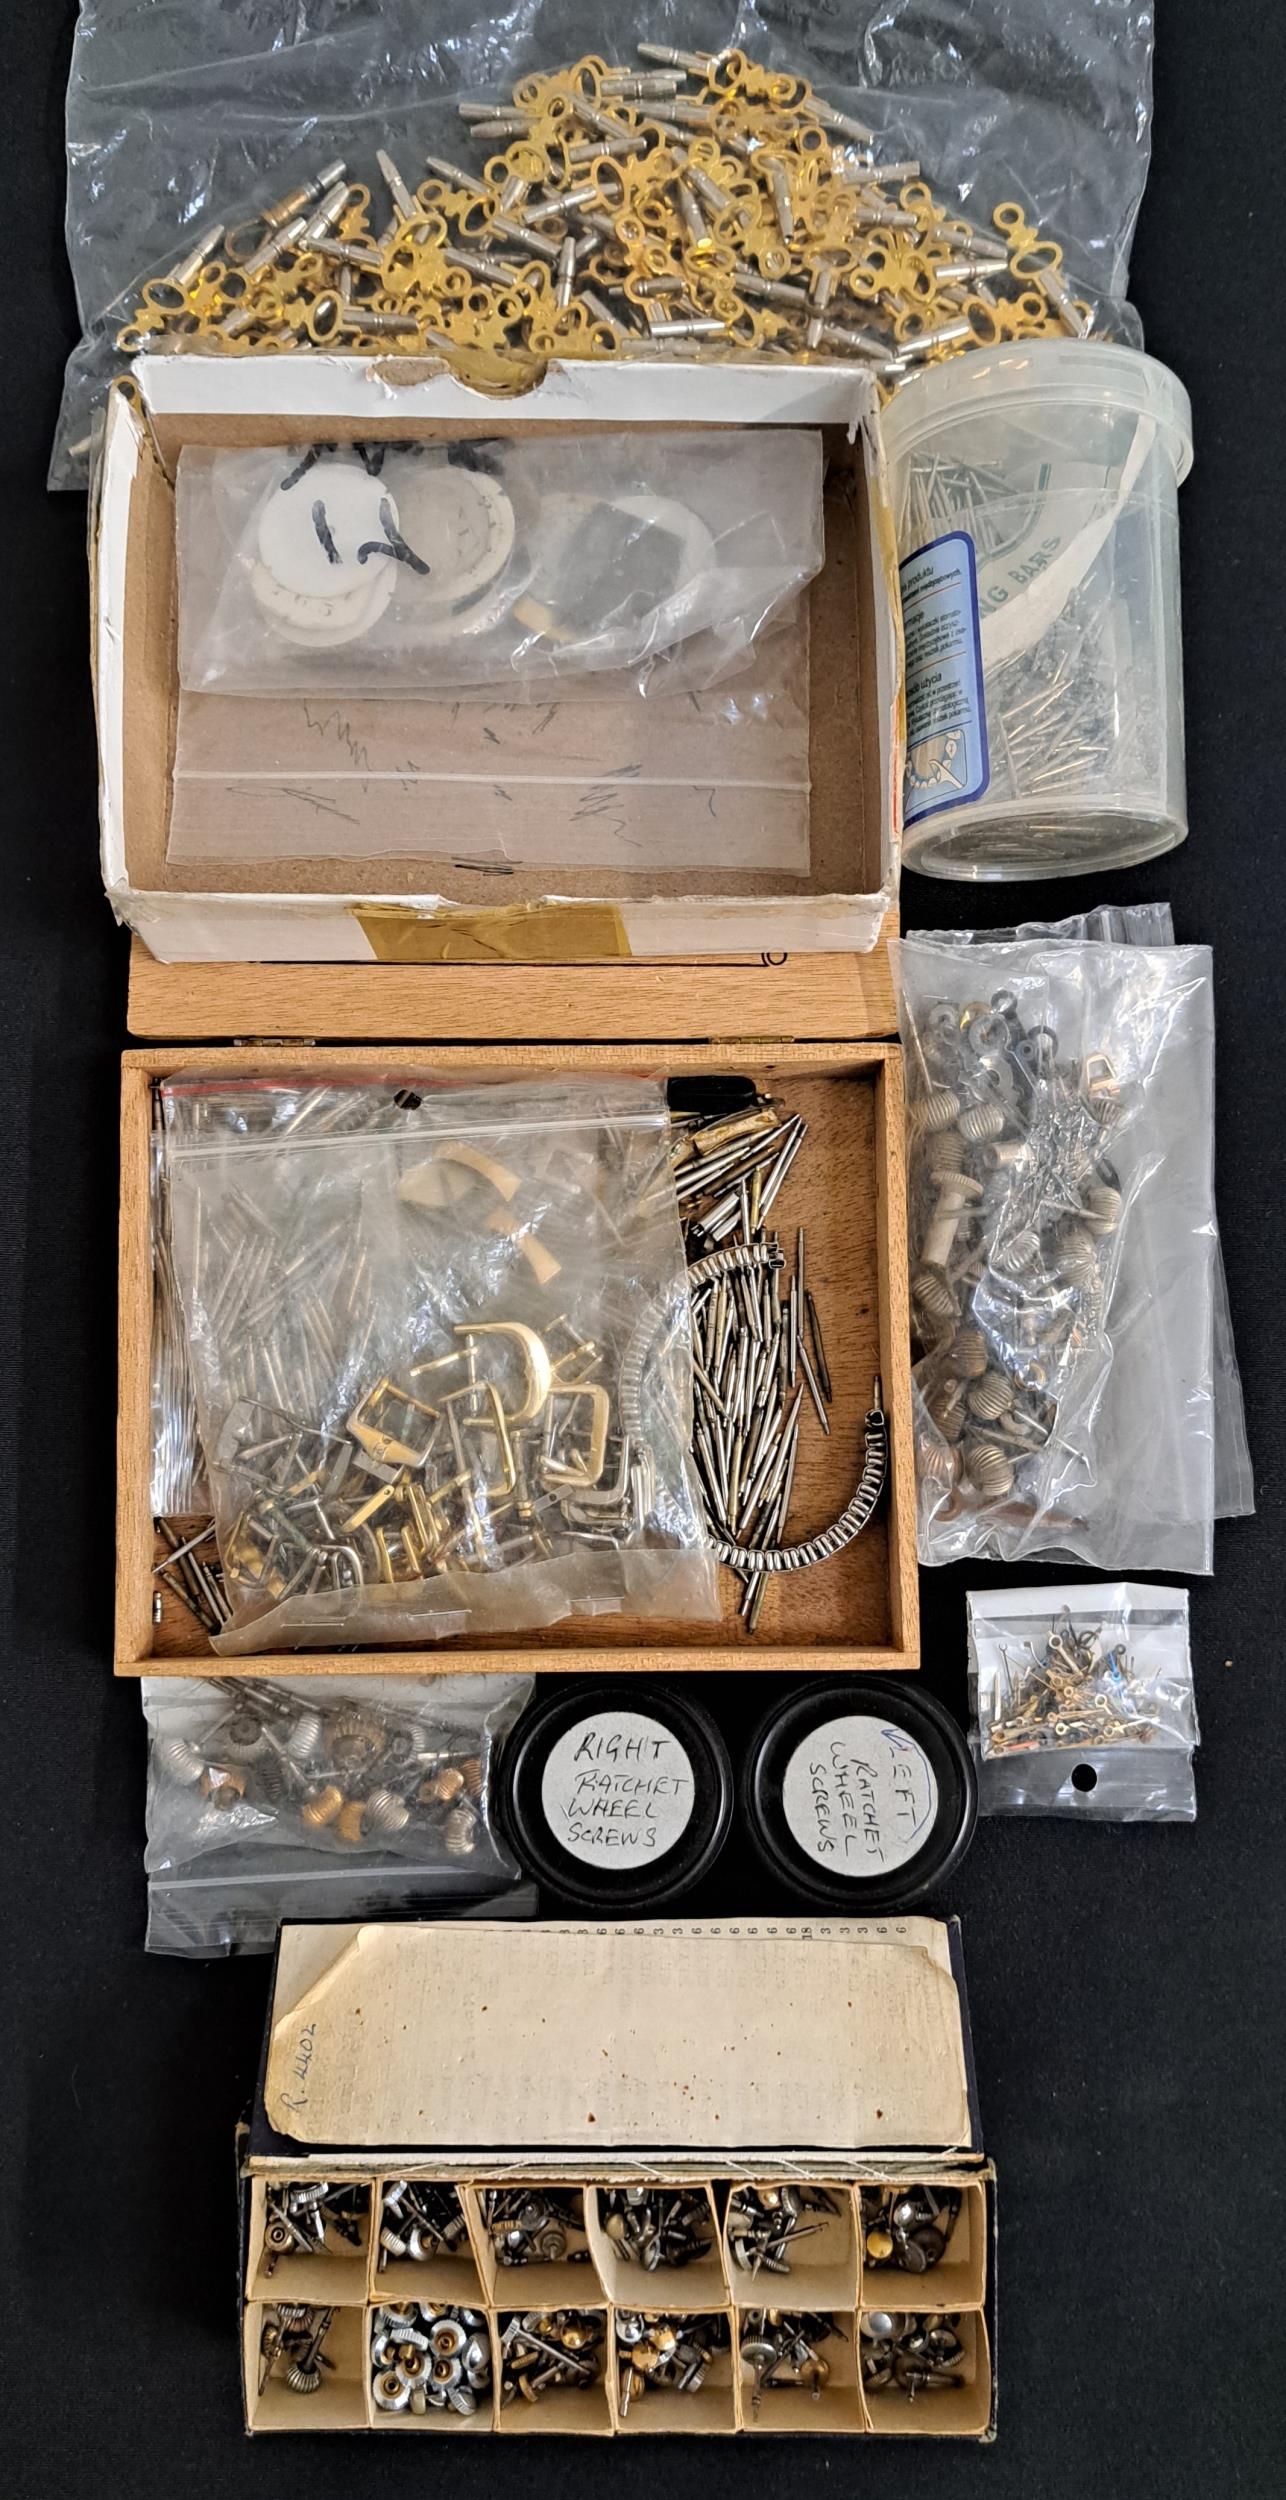 LARGE SELECTION OF WATCH PARTS including left and right ratchet wheel screws, strap pins, buckles